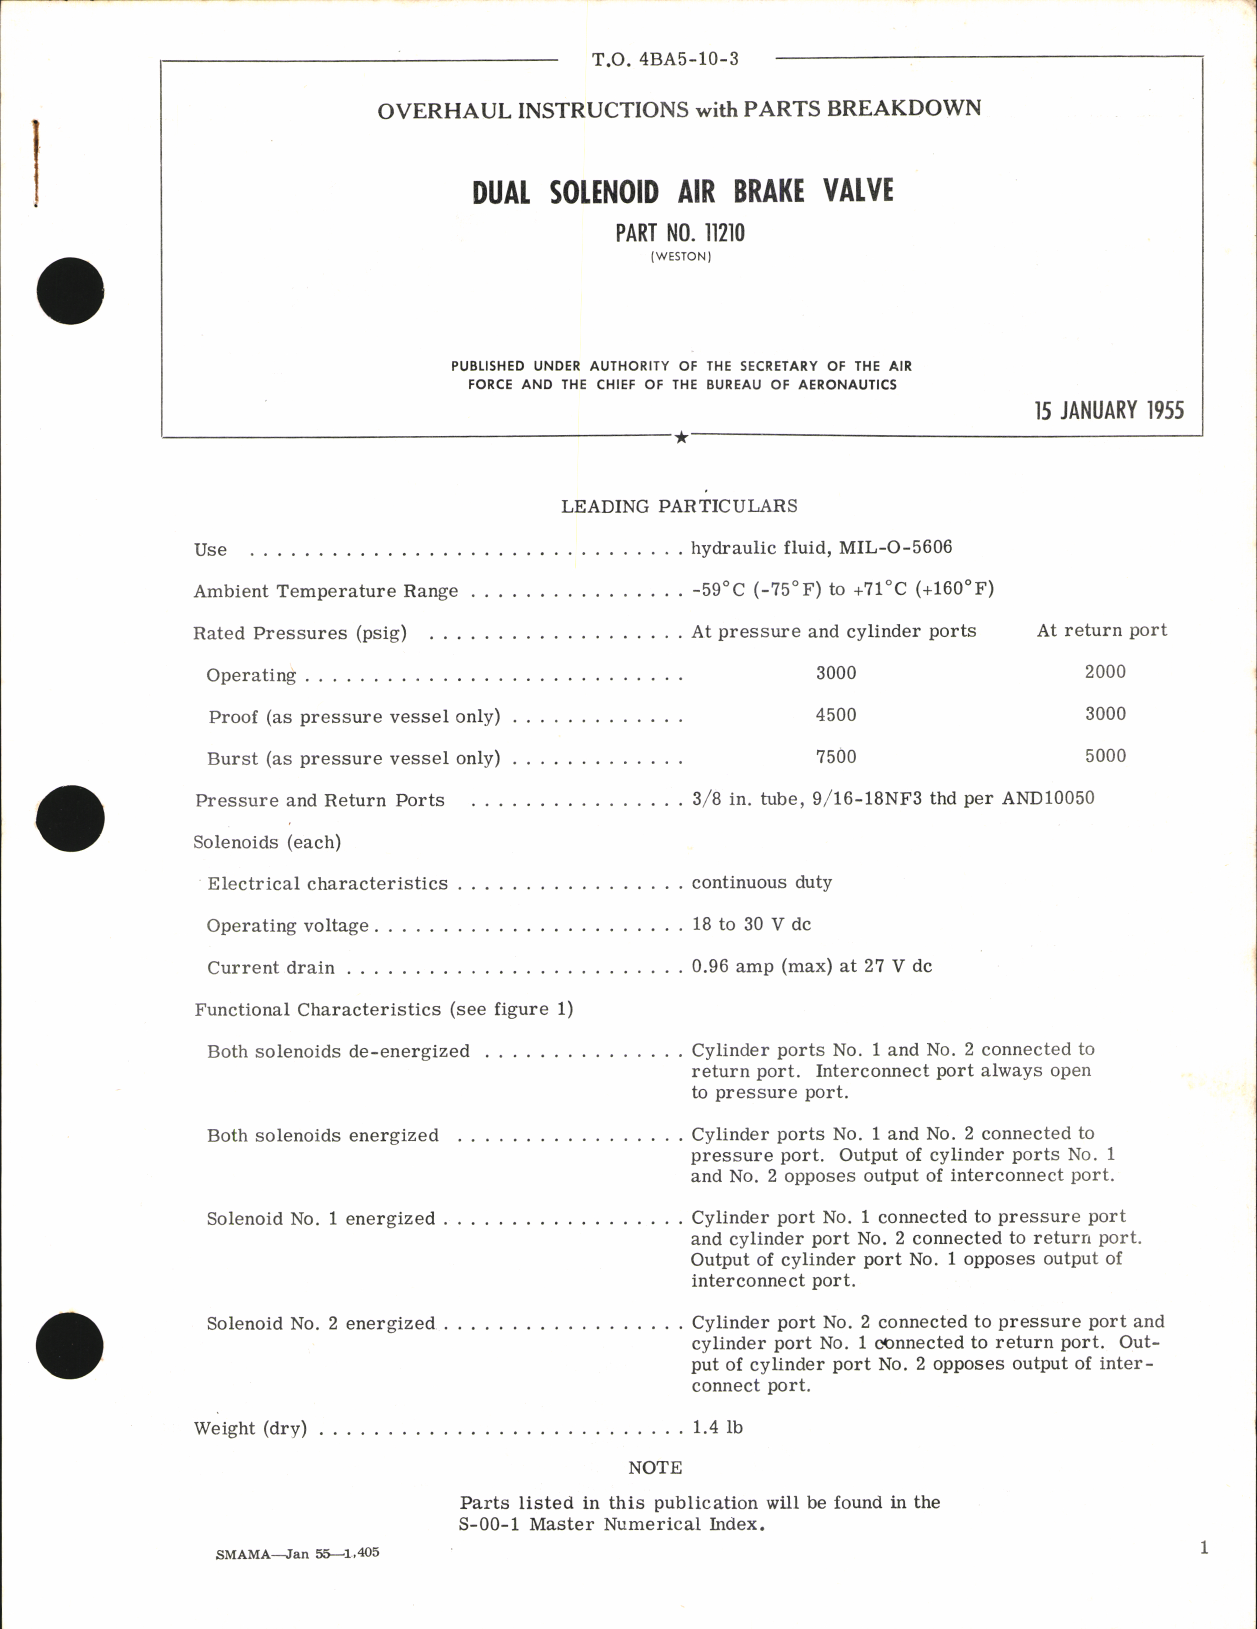 Sample page 1 from AirCorps Library document: Overhaul Instructions with Parts Breakdown for Dual Solenoid Air Brake Valve